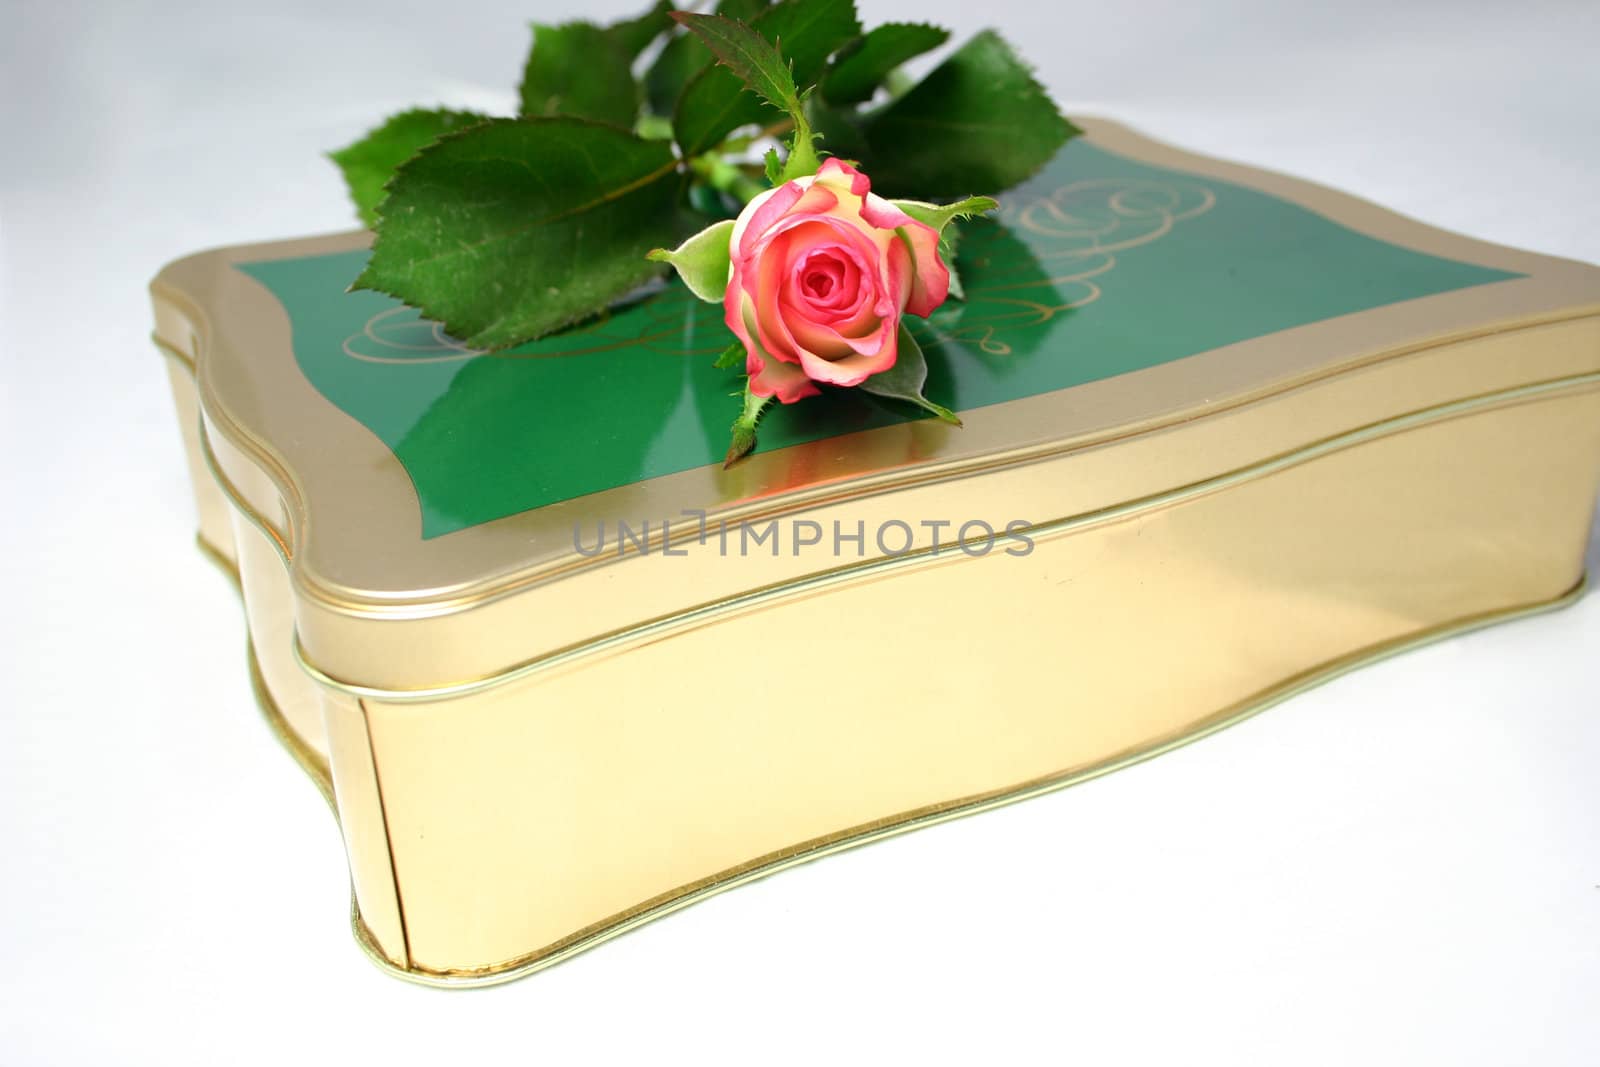 rose on a tin of chocolates over a light background